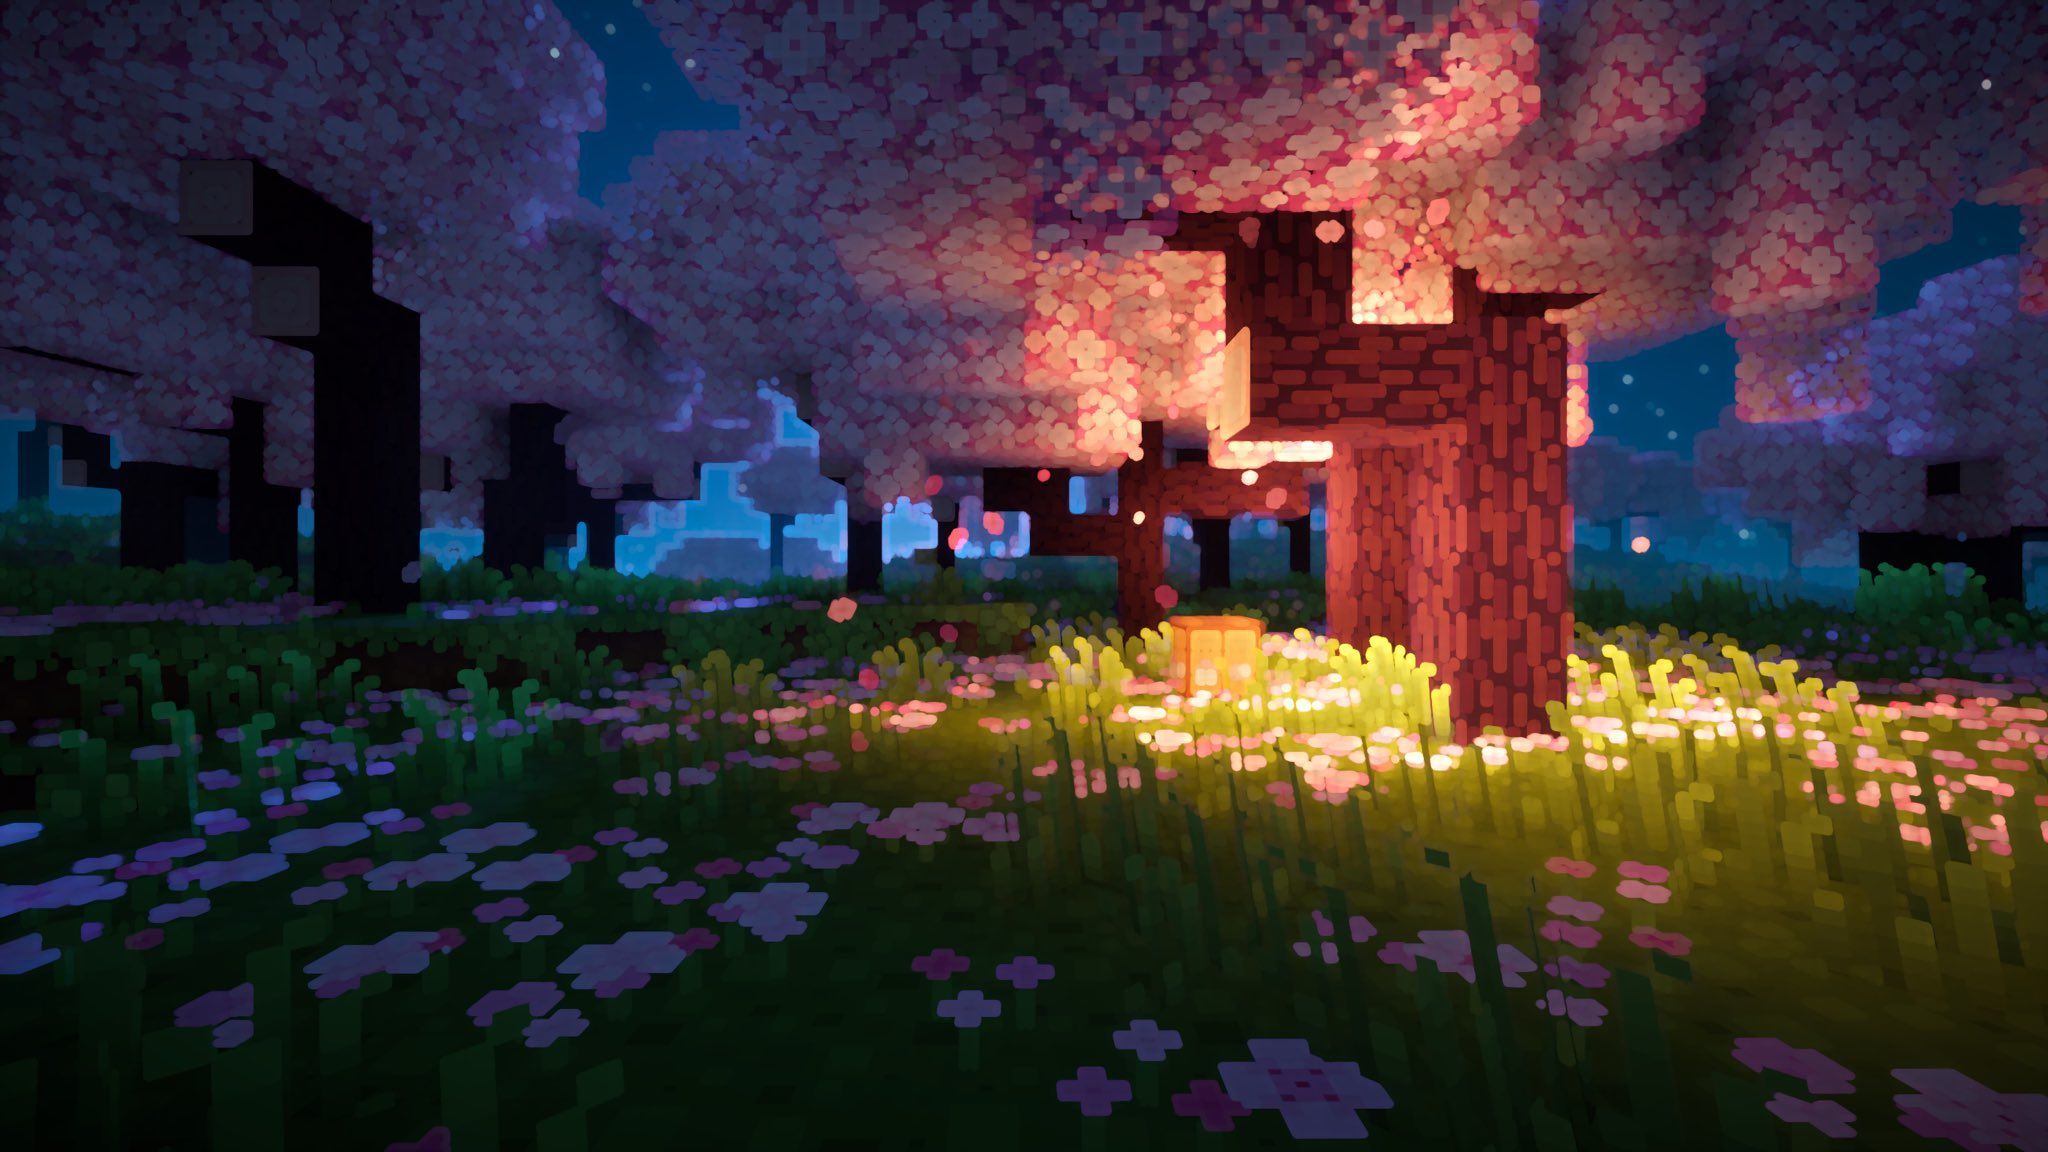 A Minecraft screenshot of a forest at night with a campfire burning in the grass. - Minecraft